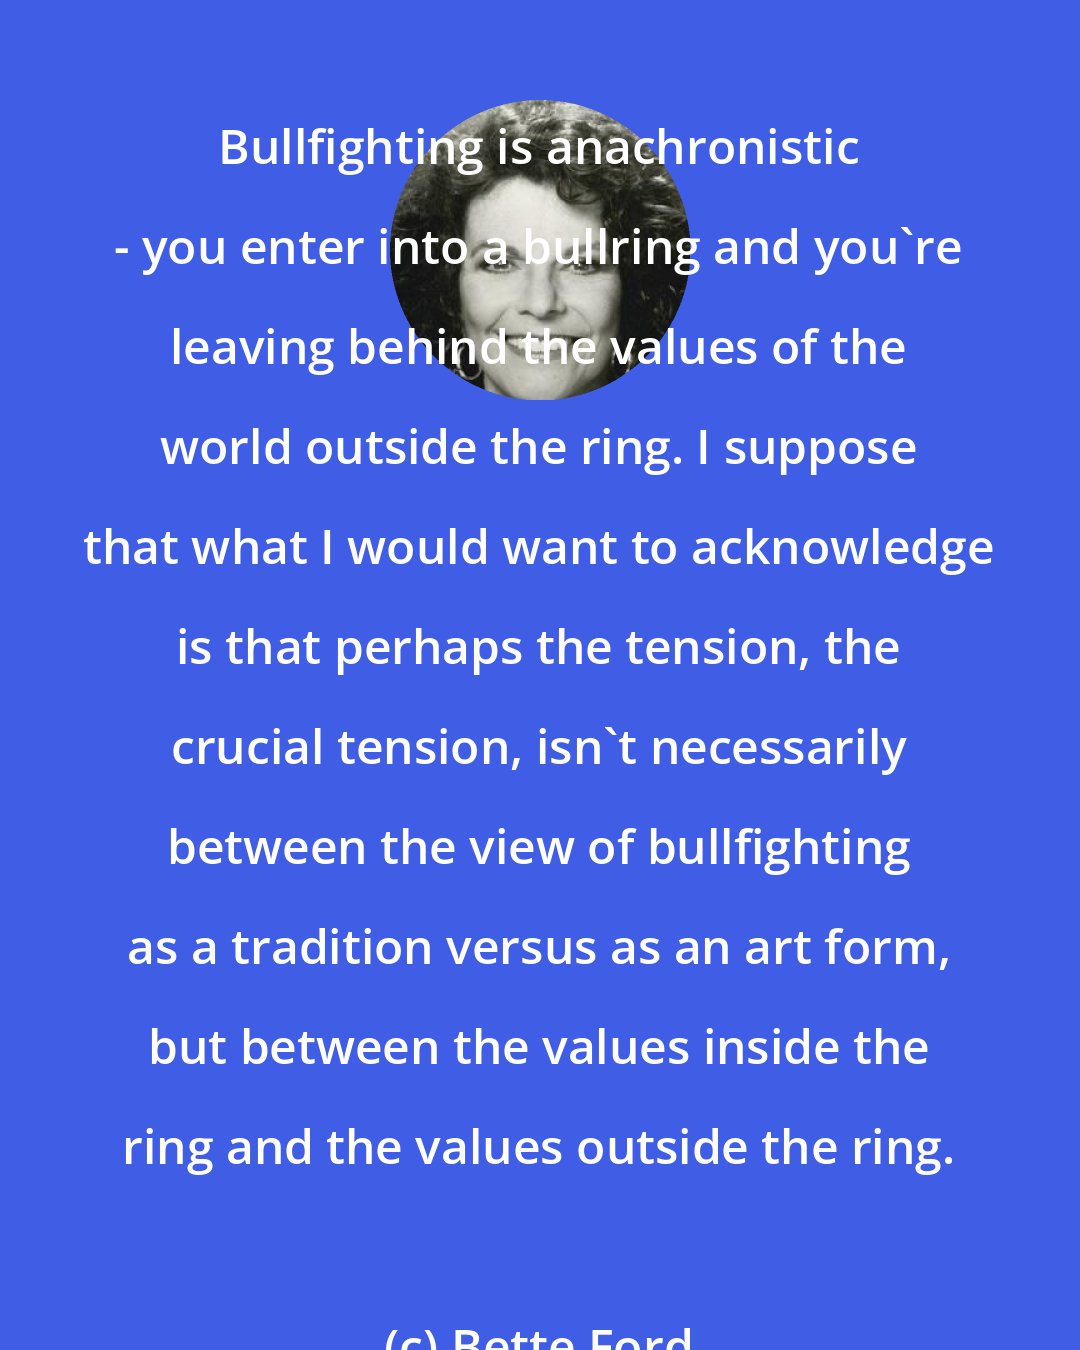 Bette Ford: Bullfighting is anachronistic - you enter into a bullring and you're leaving behind the values of the world outside the ring. I suppose that what I would want to acknowledge is that perhaps the tension, the crucial tension, isn't necessarily between the view of bullfighting as a tradition versus as an art form, but between the values inside the ring and the values outside the ring.